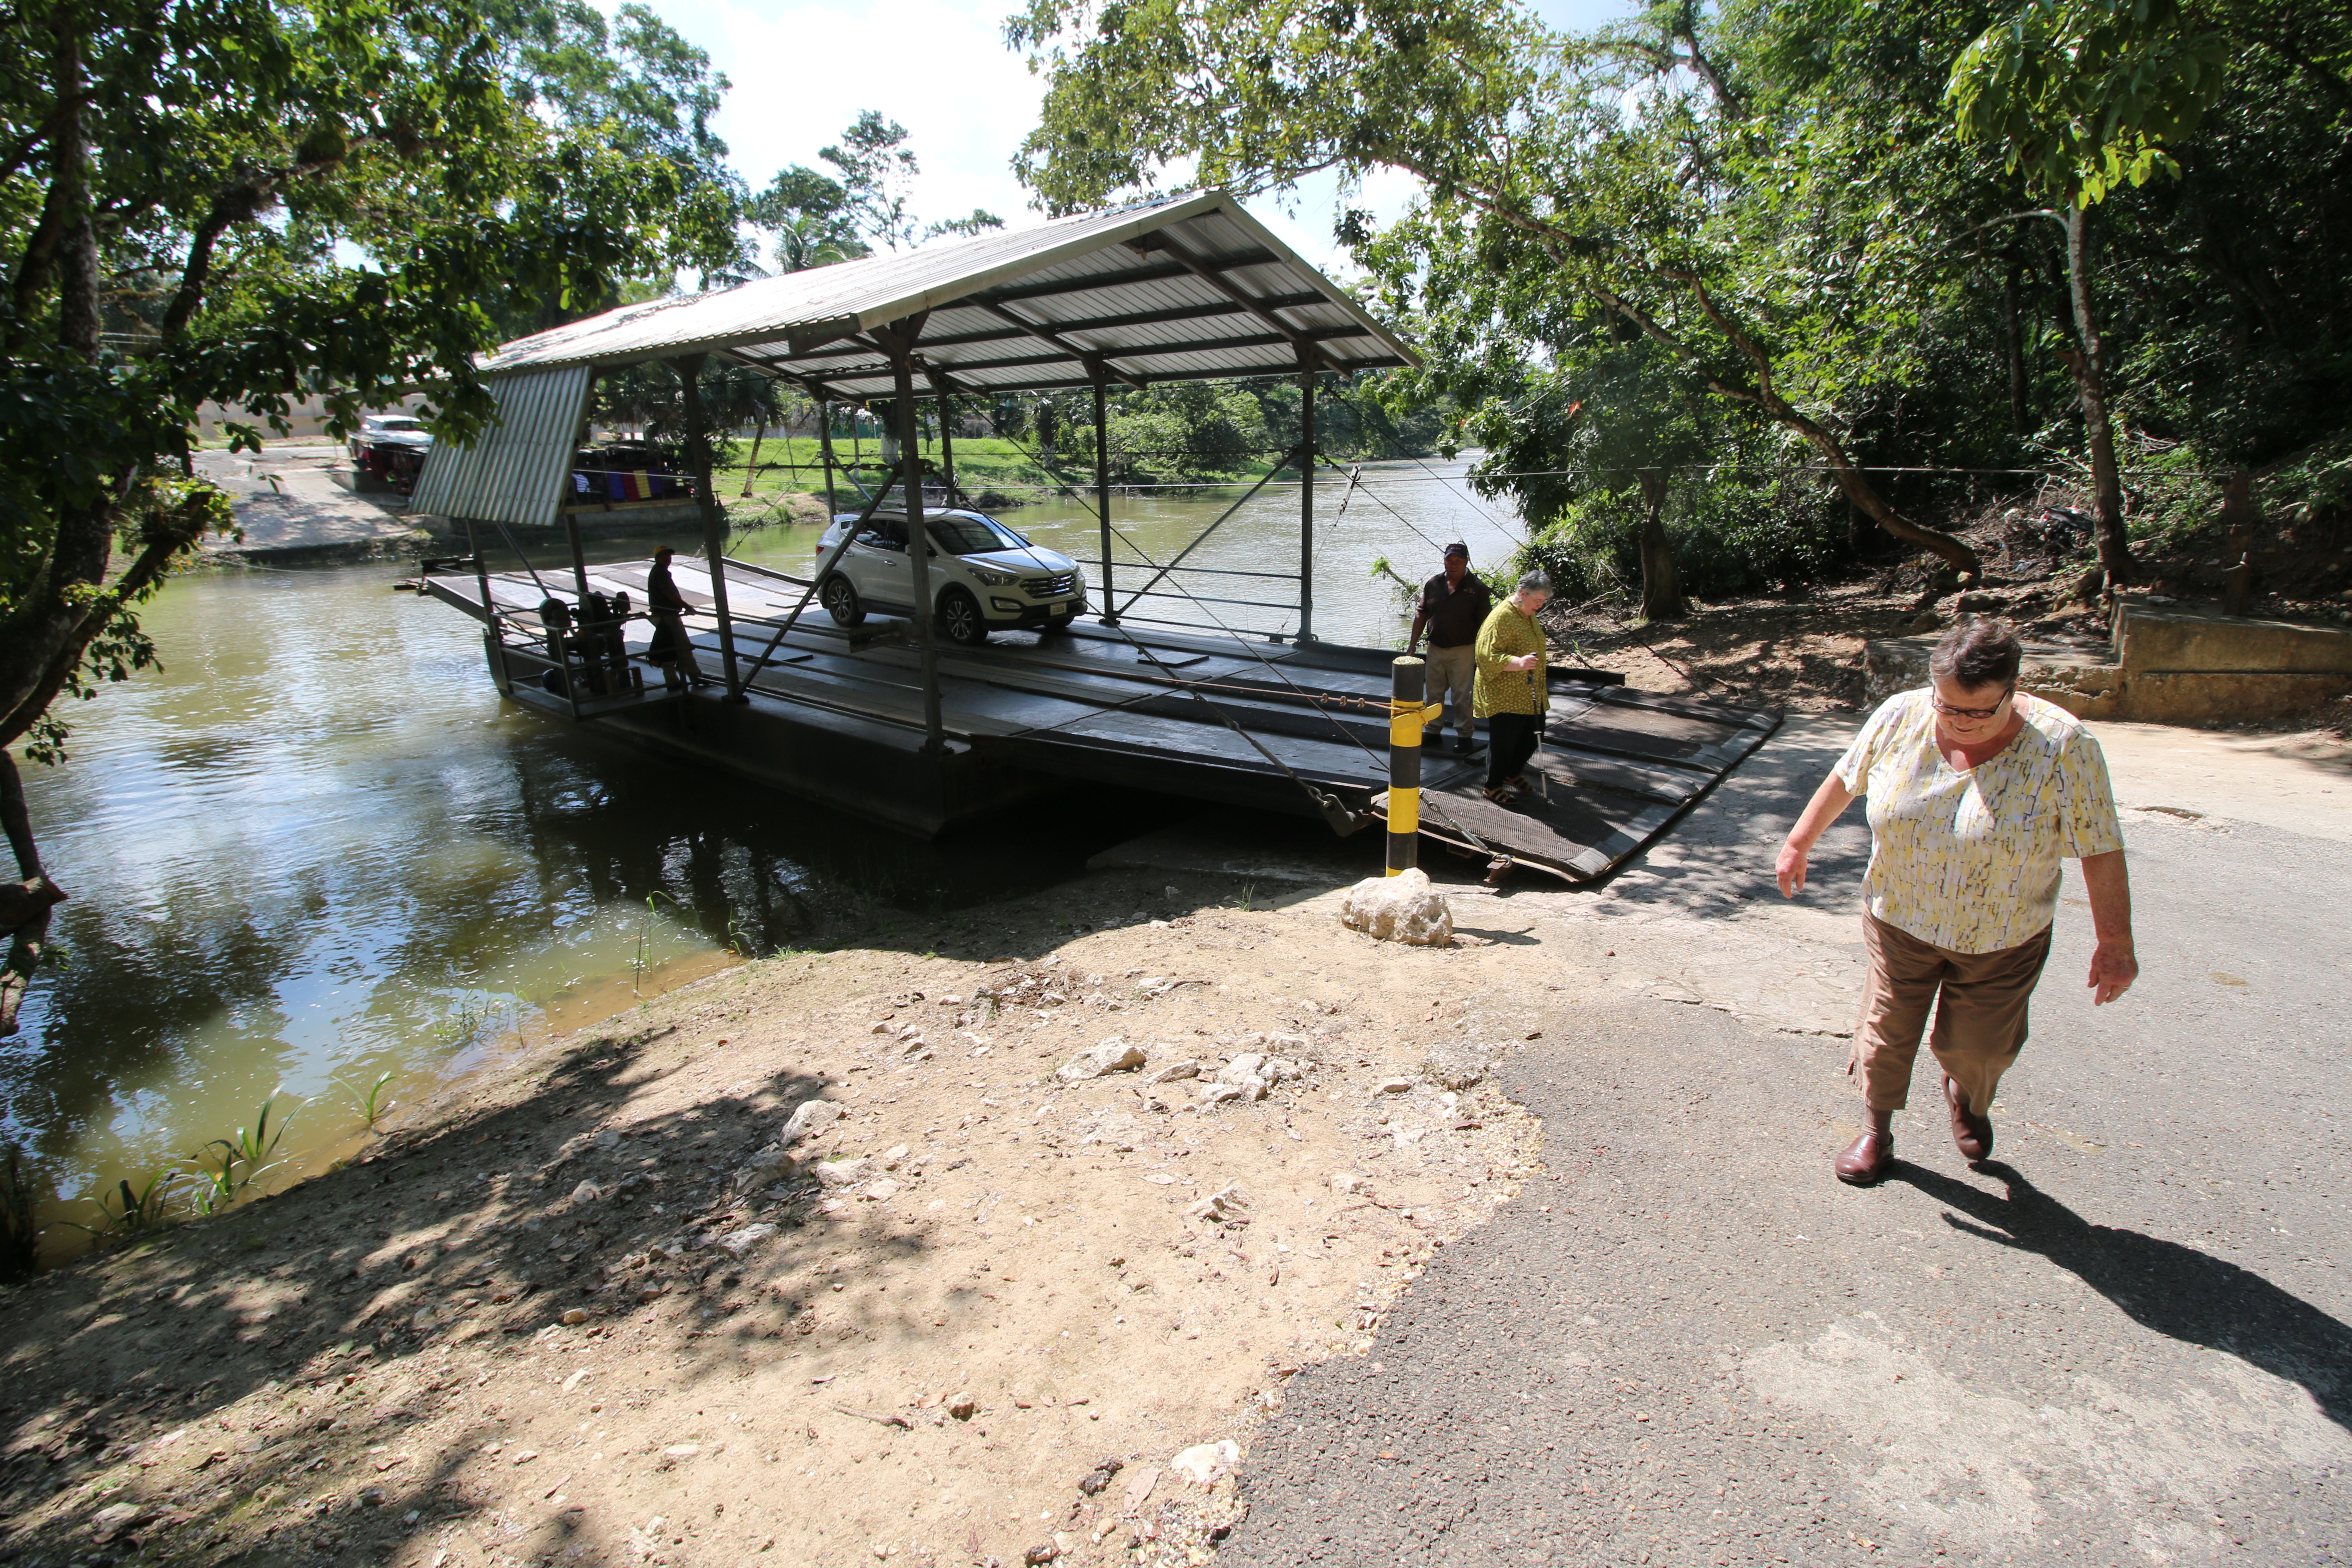 The hand-crank ferry across the river to Xunantunich